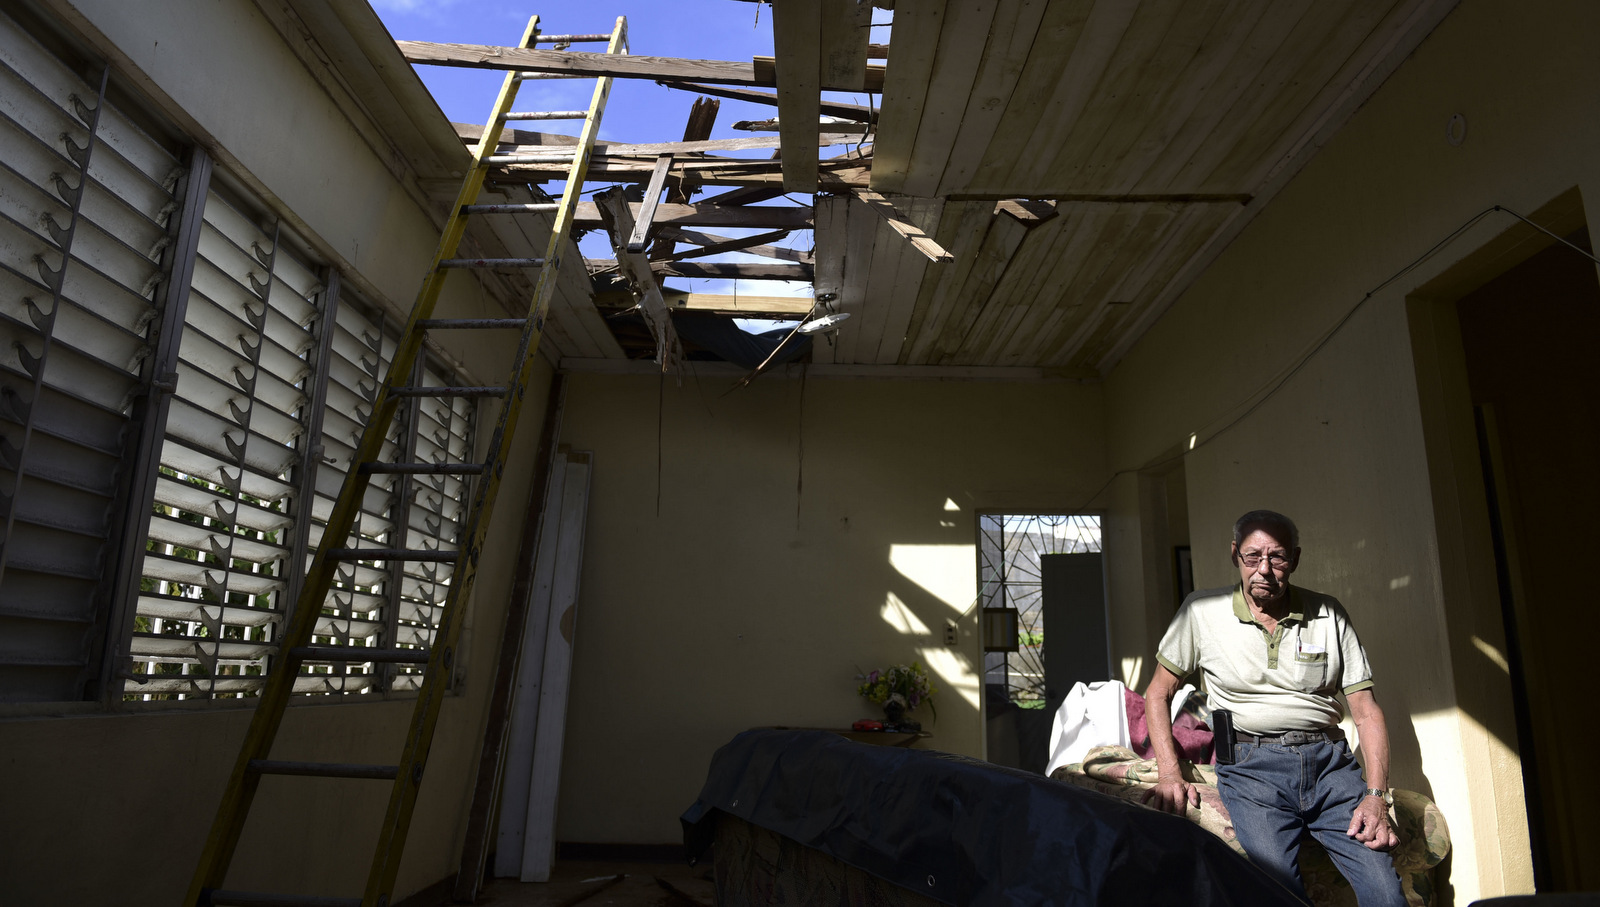 Edgardo de León sits in his living room with a hole in the ceiling caused by the whip of hurricane Maria, in Cataño, Puerto Rico. A newly created Florida company with an unproven record won more than $30 million in contracts from the Federal Emergency Management Agency to provide emergency tarps and plastic sheeting for repairs to hurricane victims in Puerto Rico. Bronze Star LLC never delivered those urgently needed supplies, which even months later remain in demand on the island, Nov. 15, 2017. (AP/Carlos Giusti)